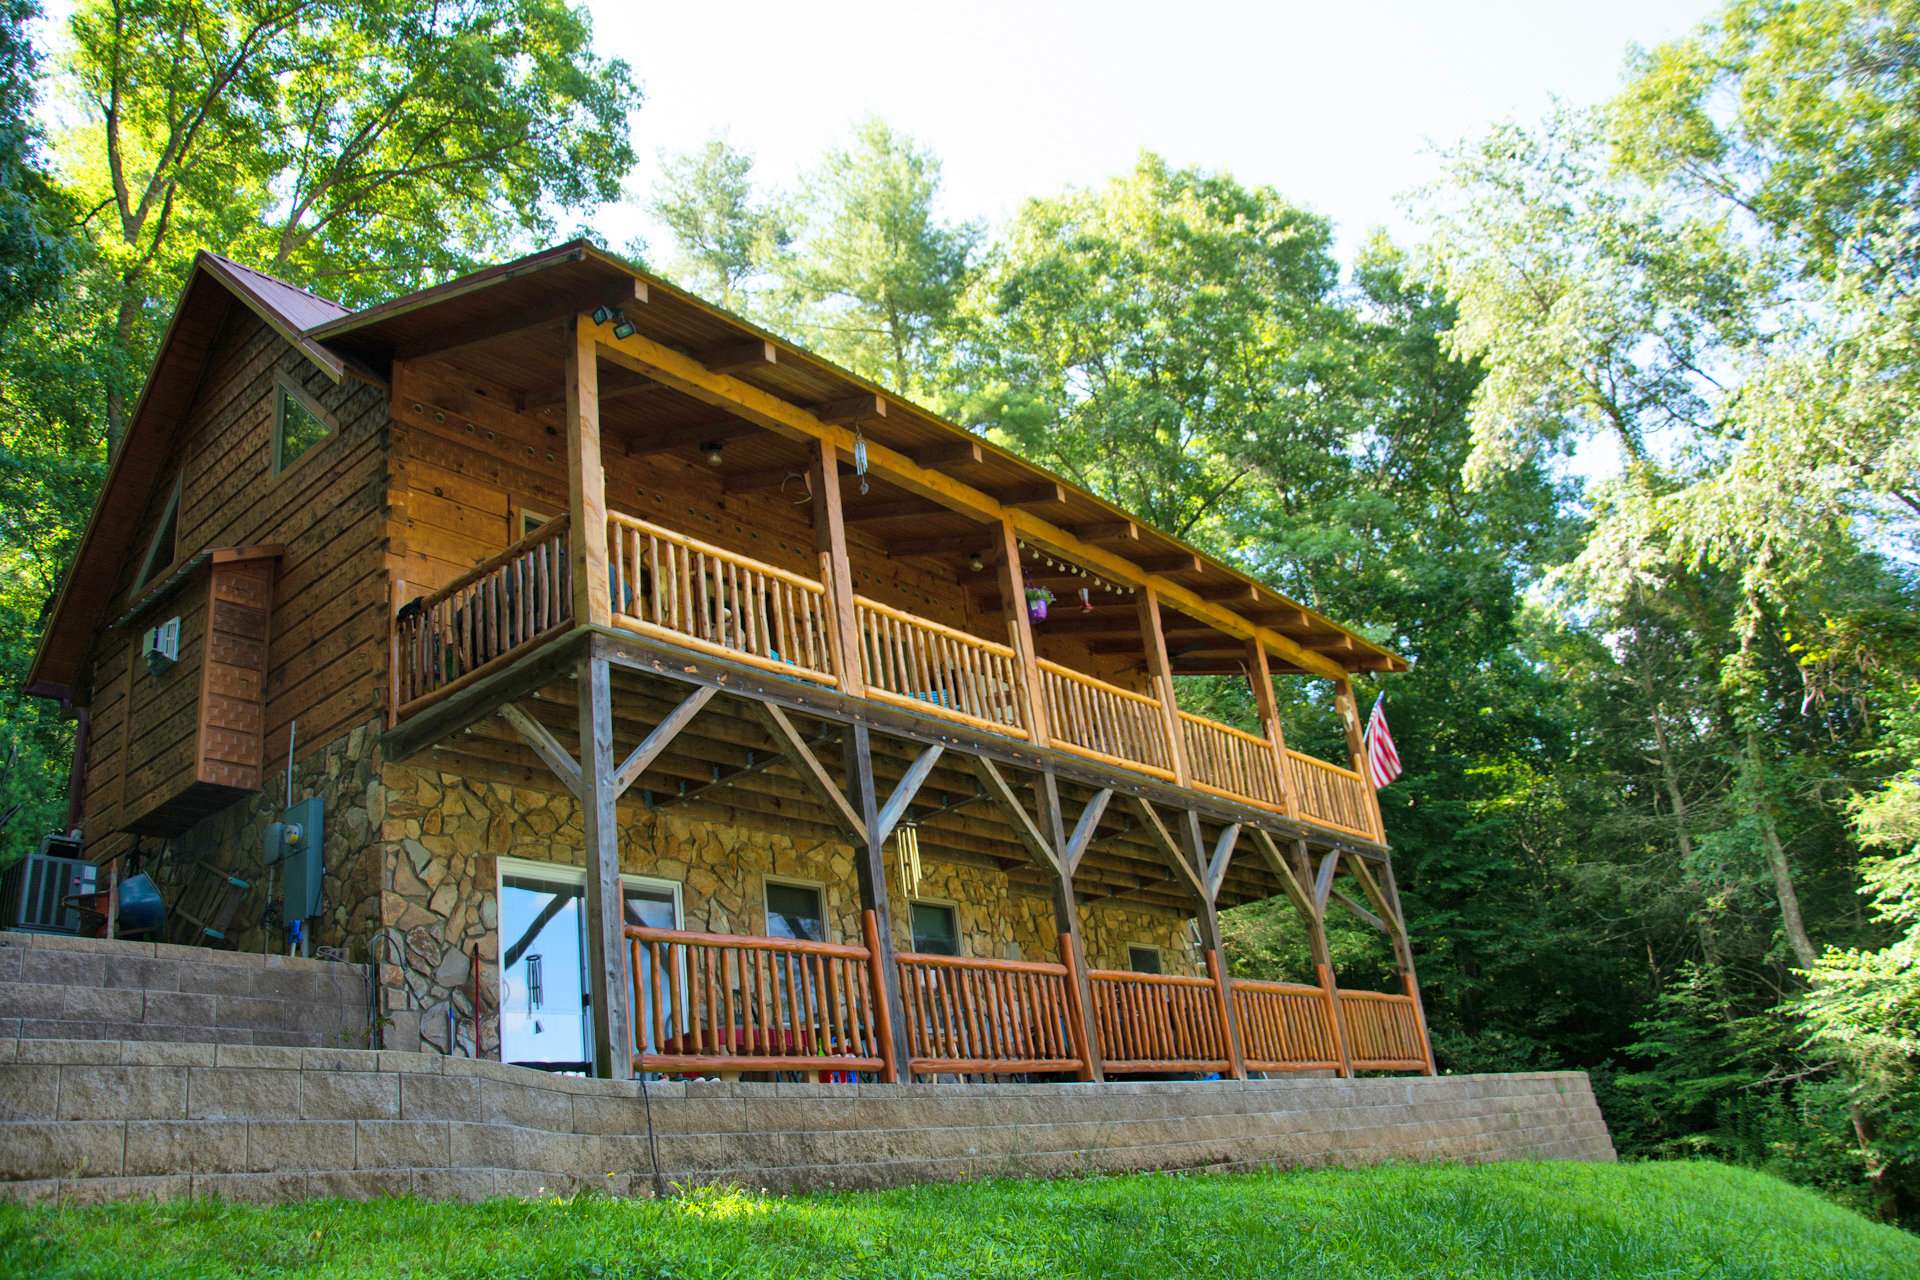 This cabin features two levels of covered decking to enjoy the river views and outdoor entertaining.